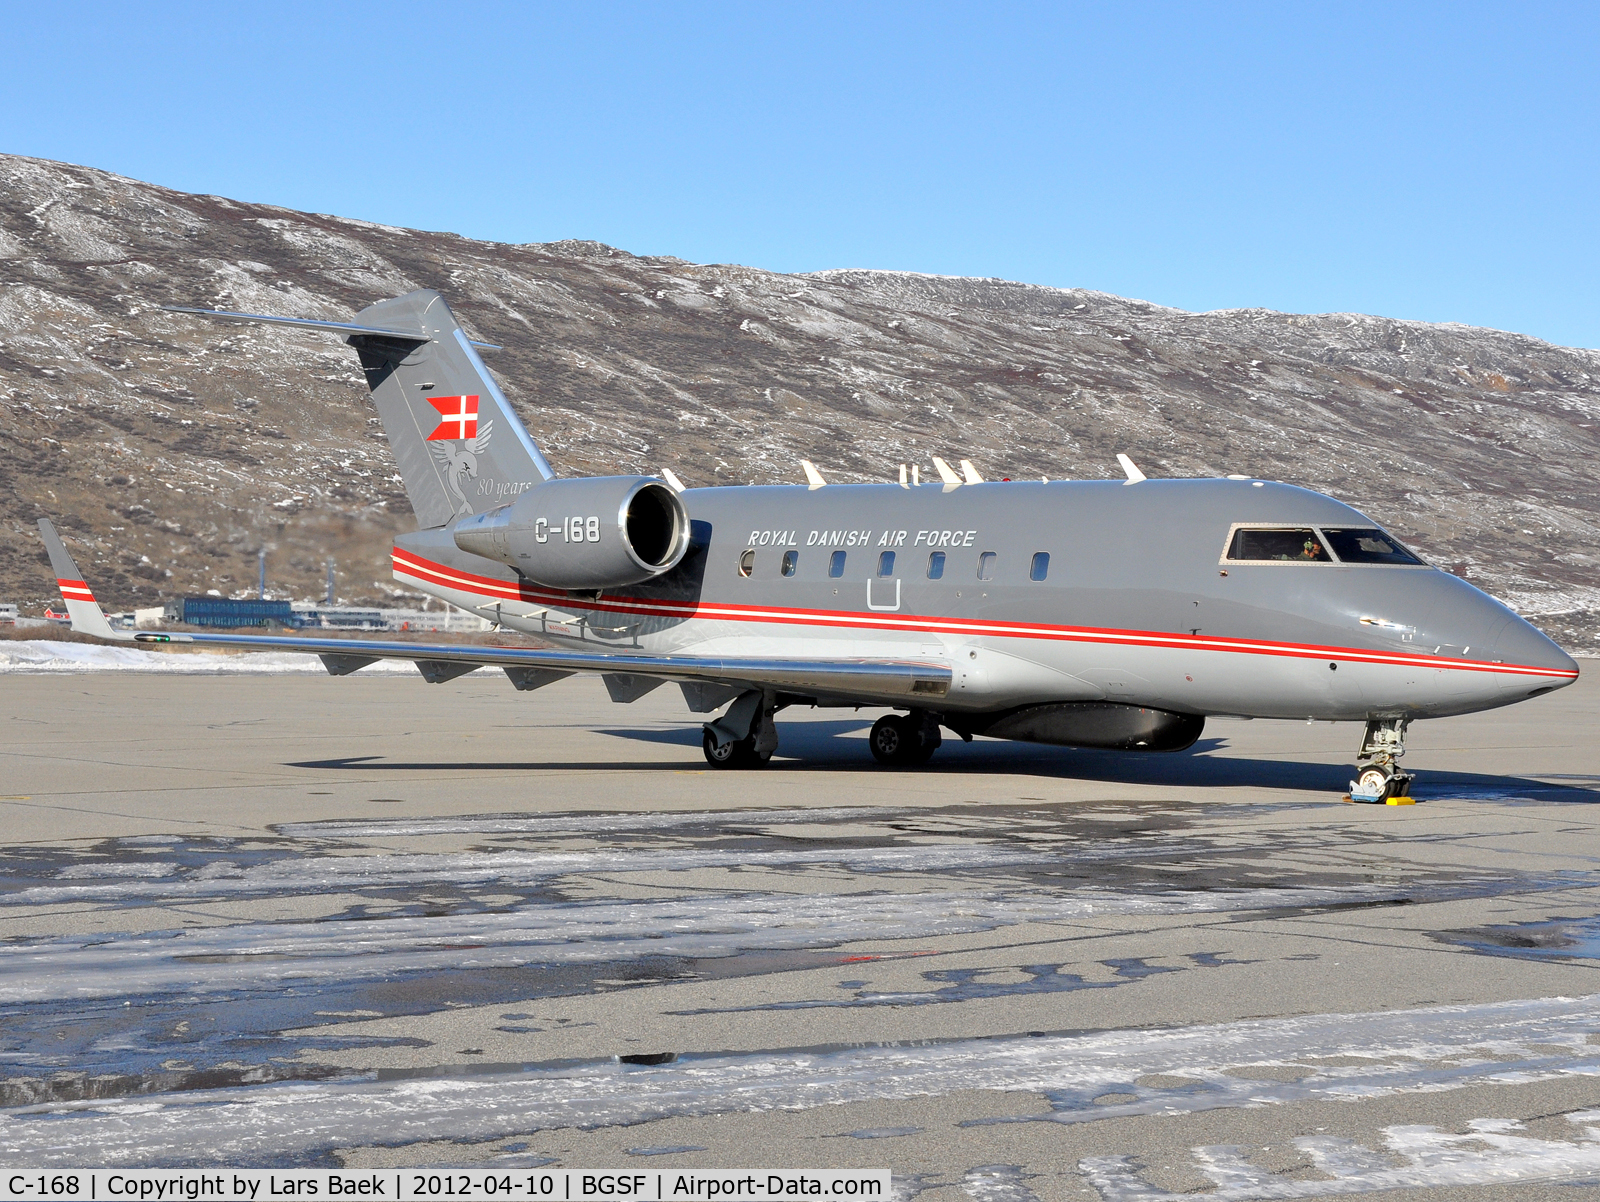 C-168, 2000 Bombardier Challenger 604 (CL-600-2B16) C/N 5468, Parked